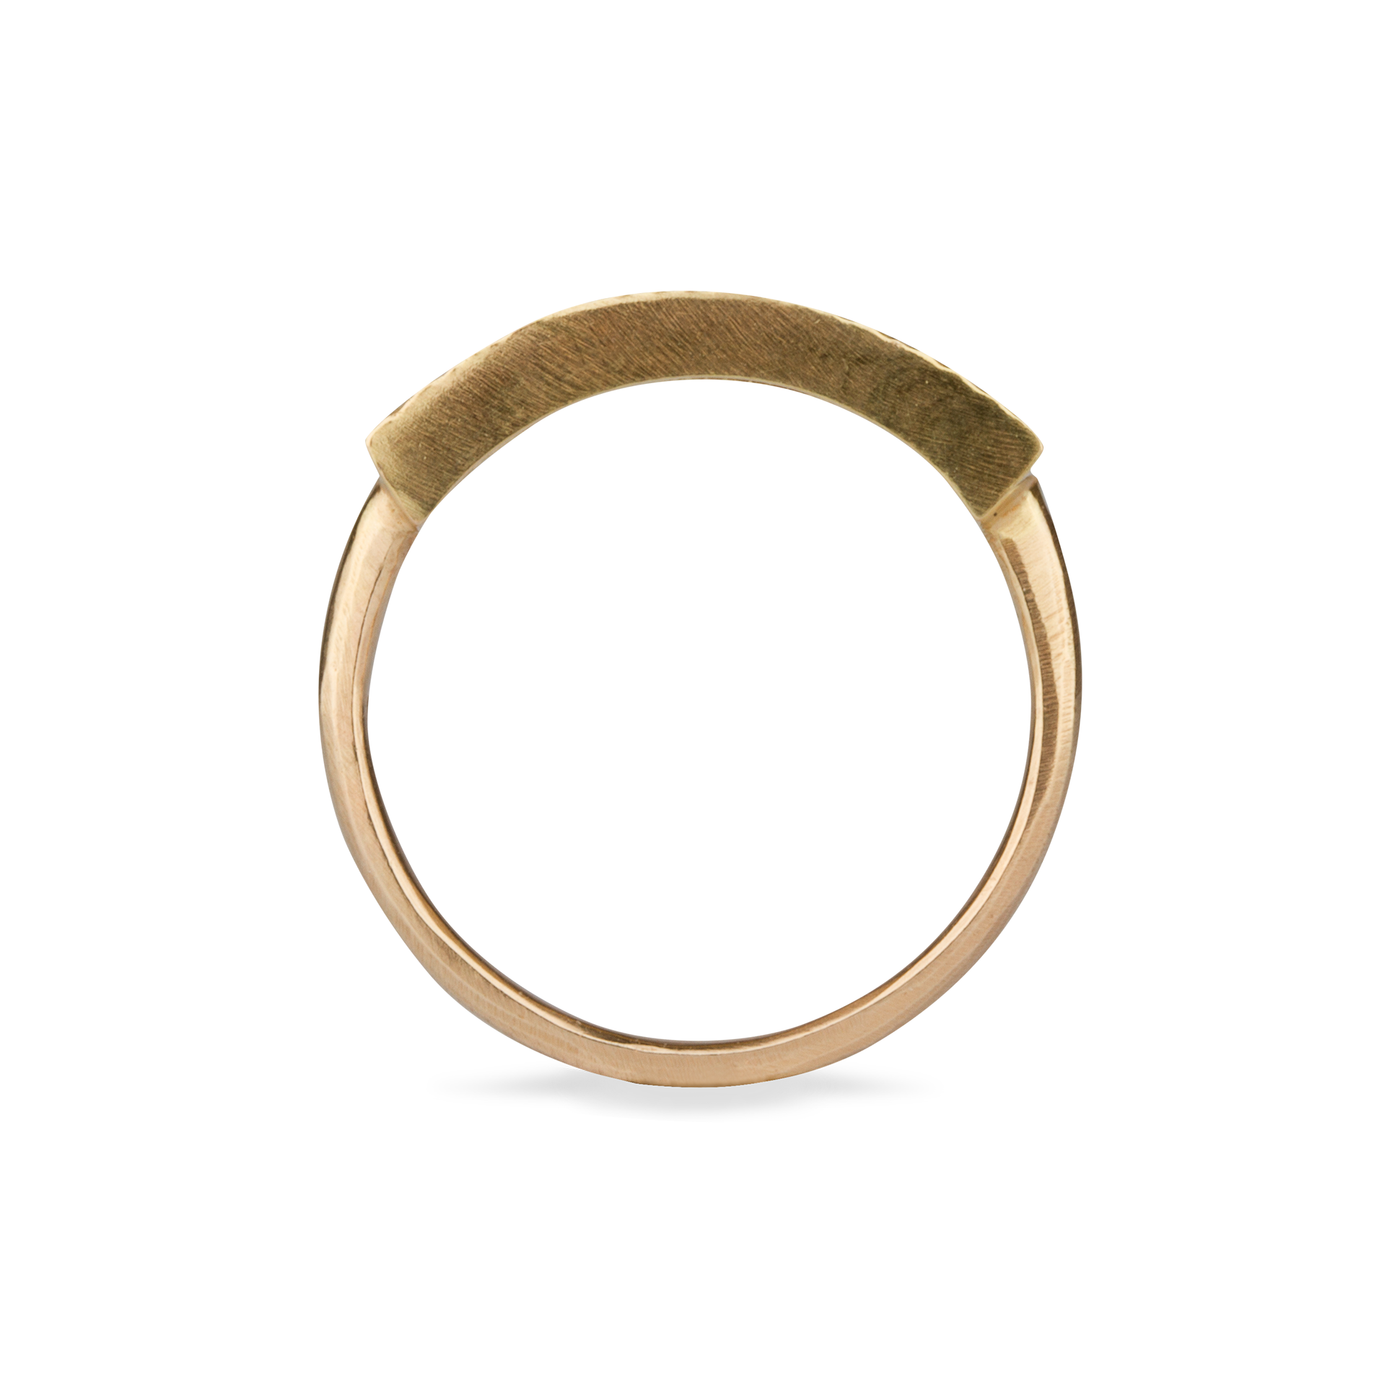 Yellow gold bar ring with three diamonds and a carved sunburst design around each by Corey Egan profile view on a white background